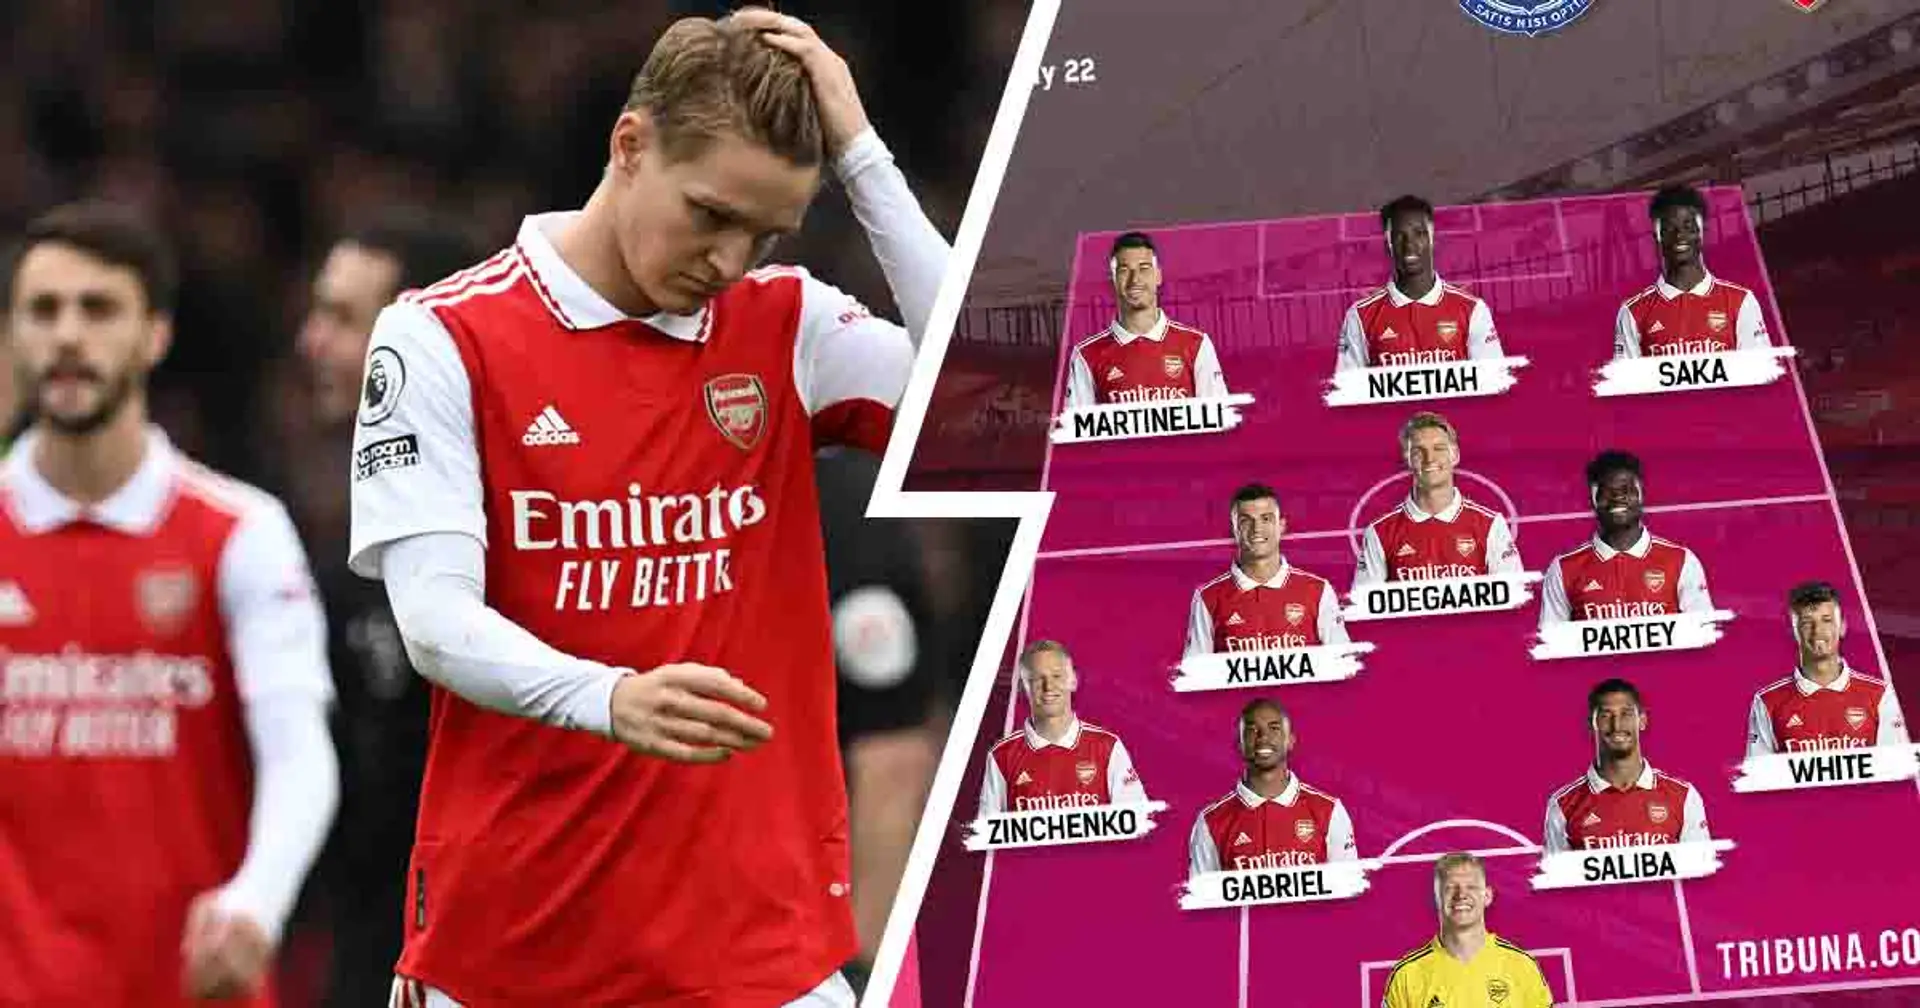 Arsenal fans want one player benched after Everton loss - not Martinelli